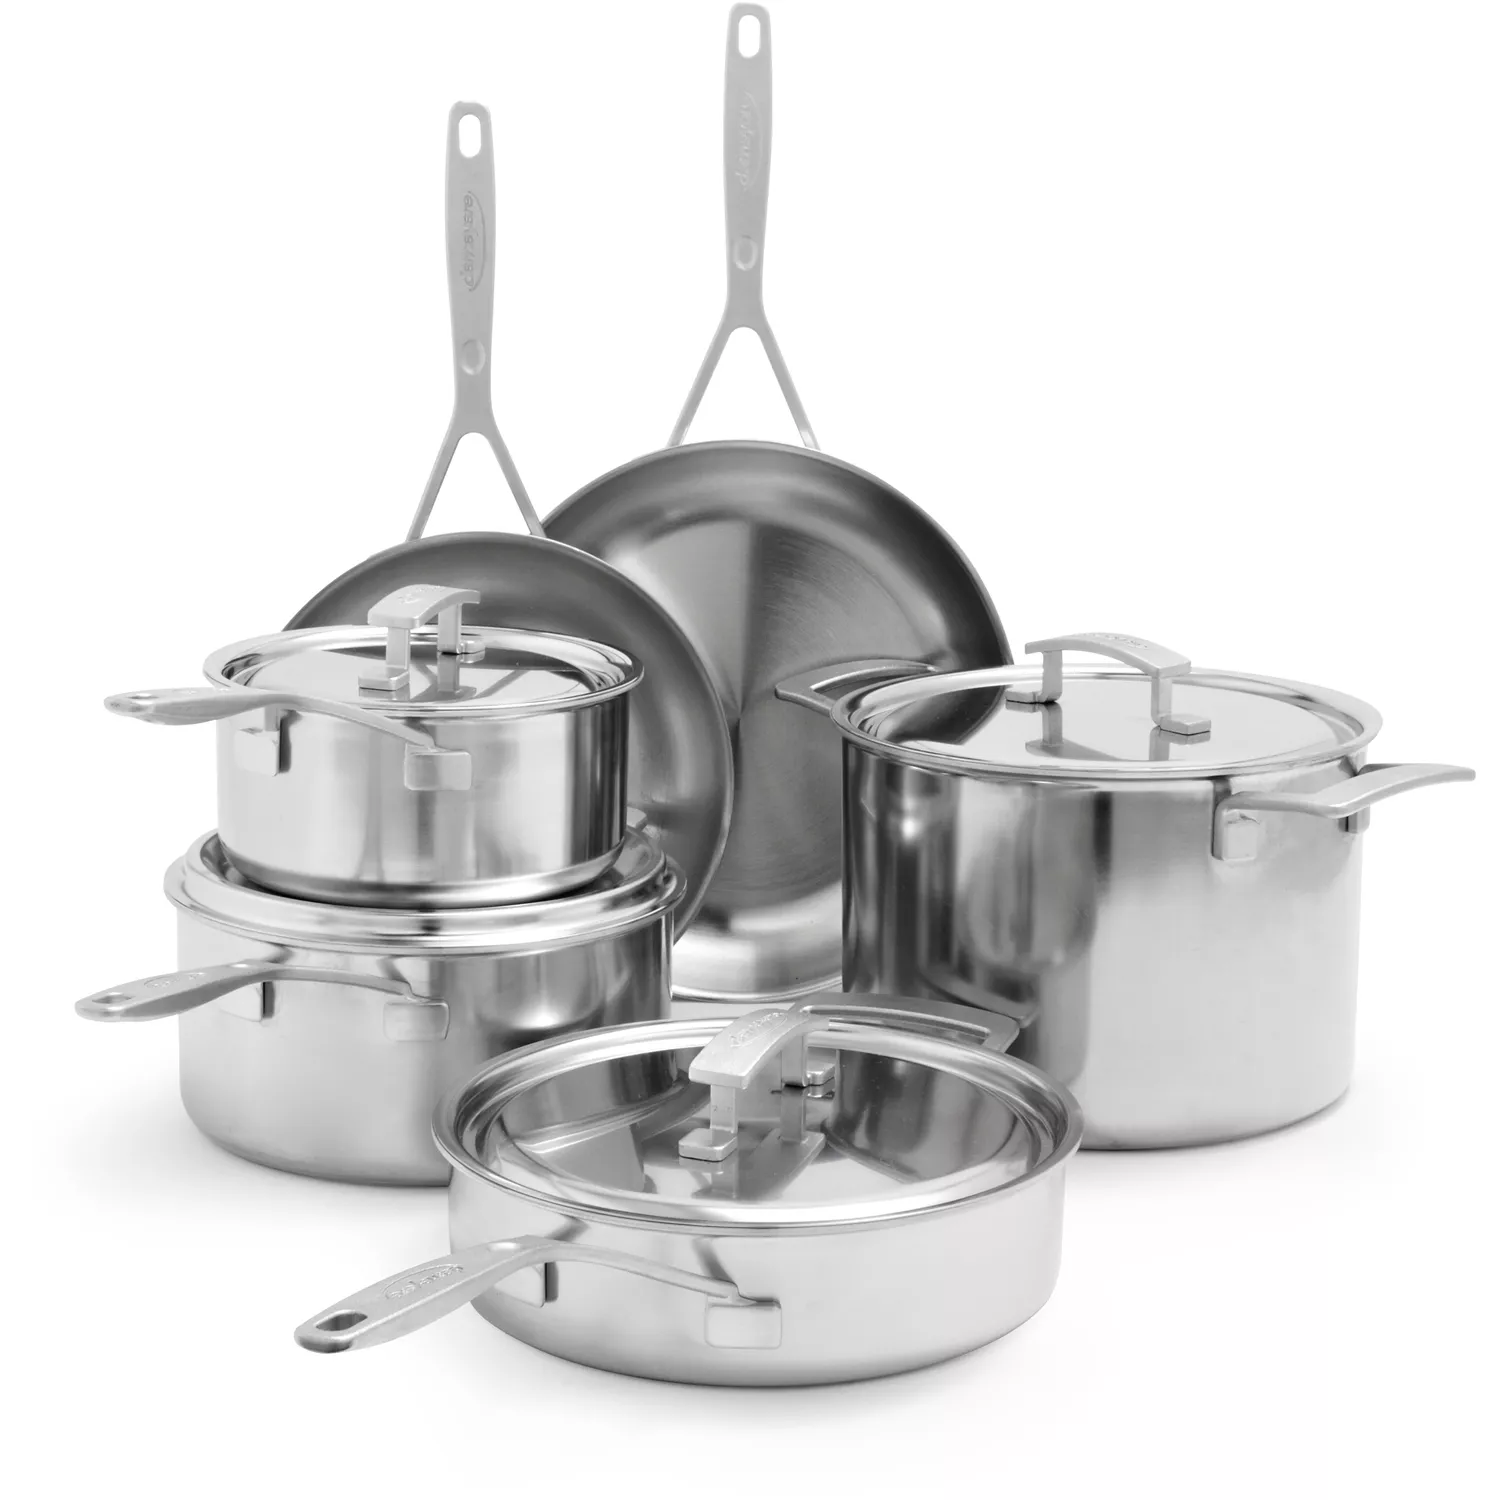 Demeyere Cookware Set 5-Ply Plus Stainless Steel 14-Piece